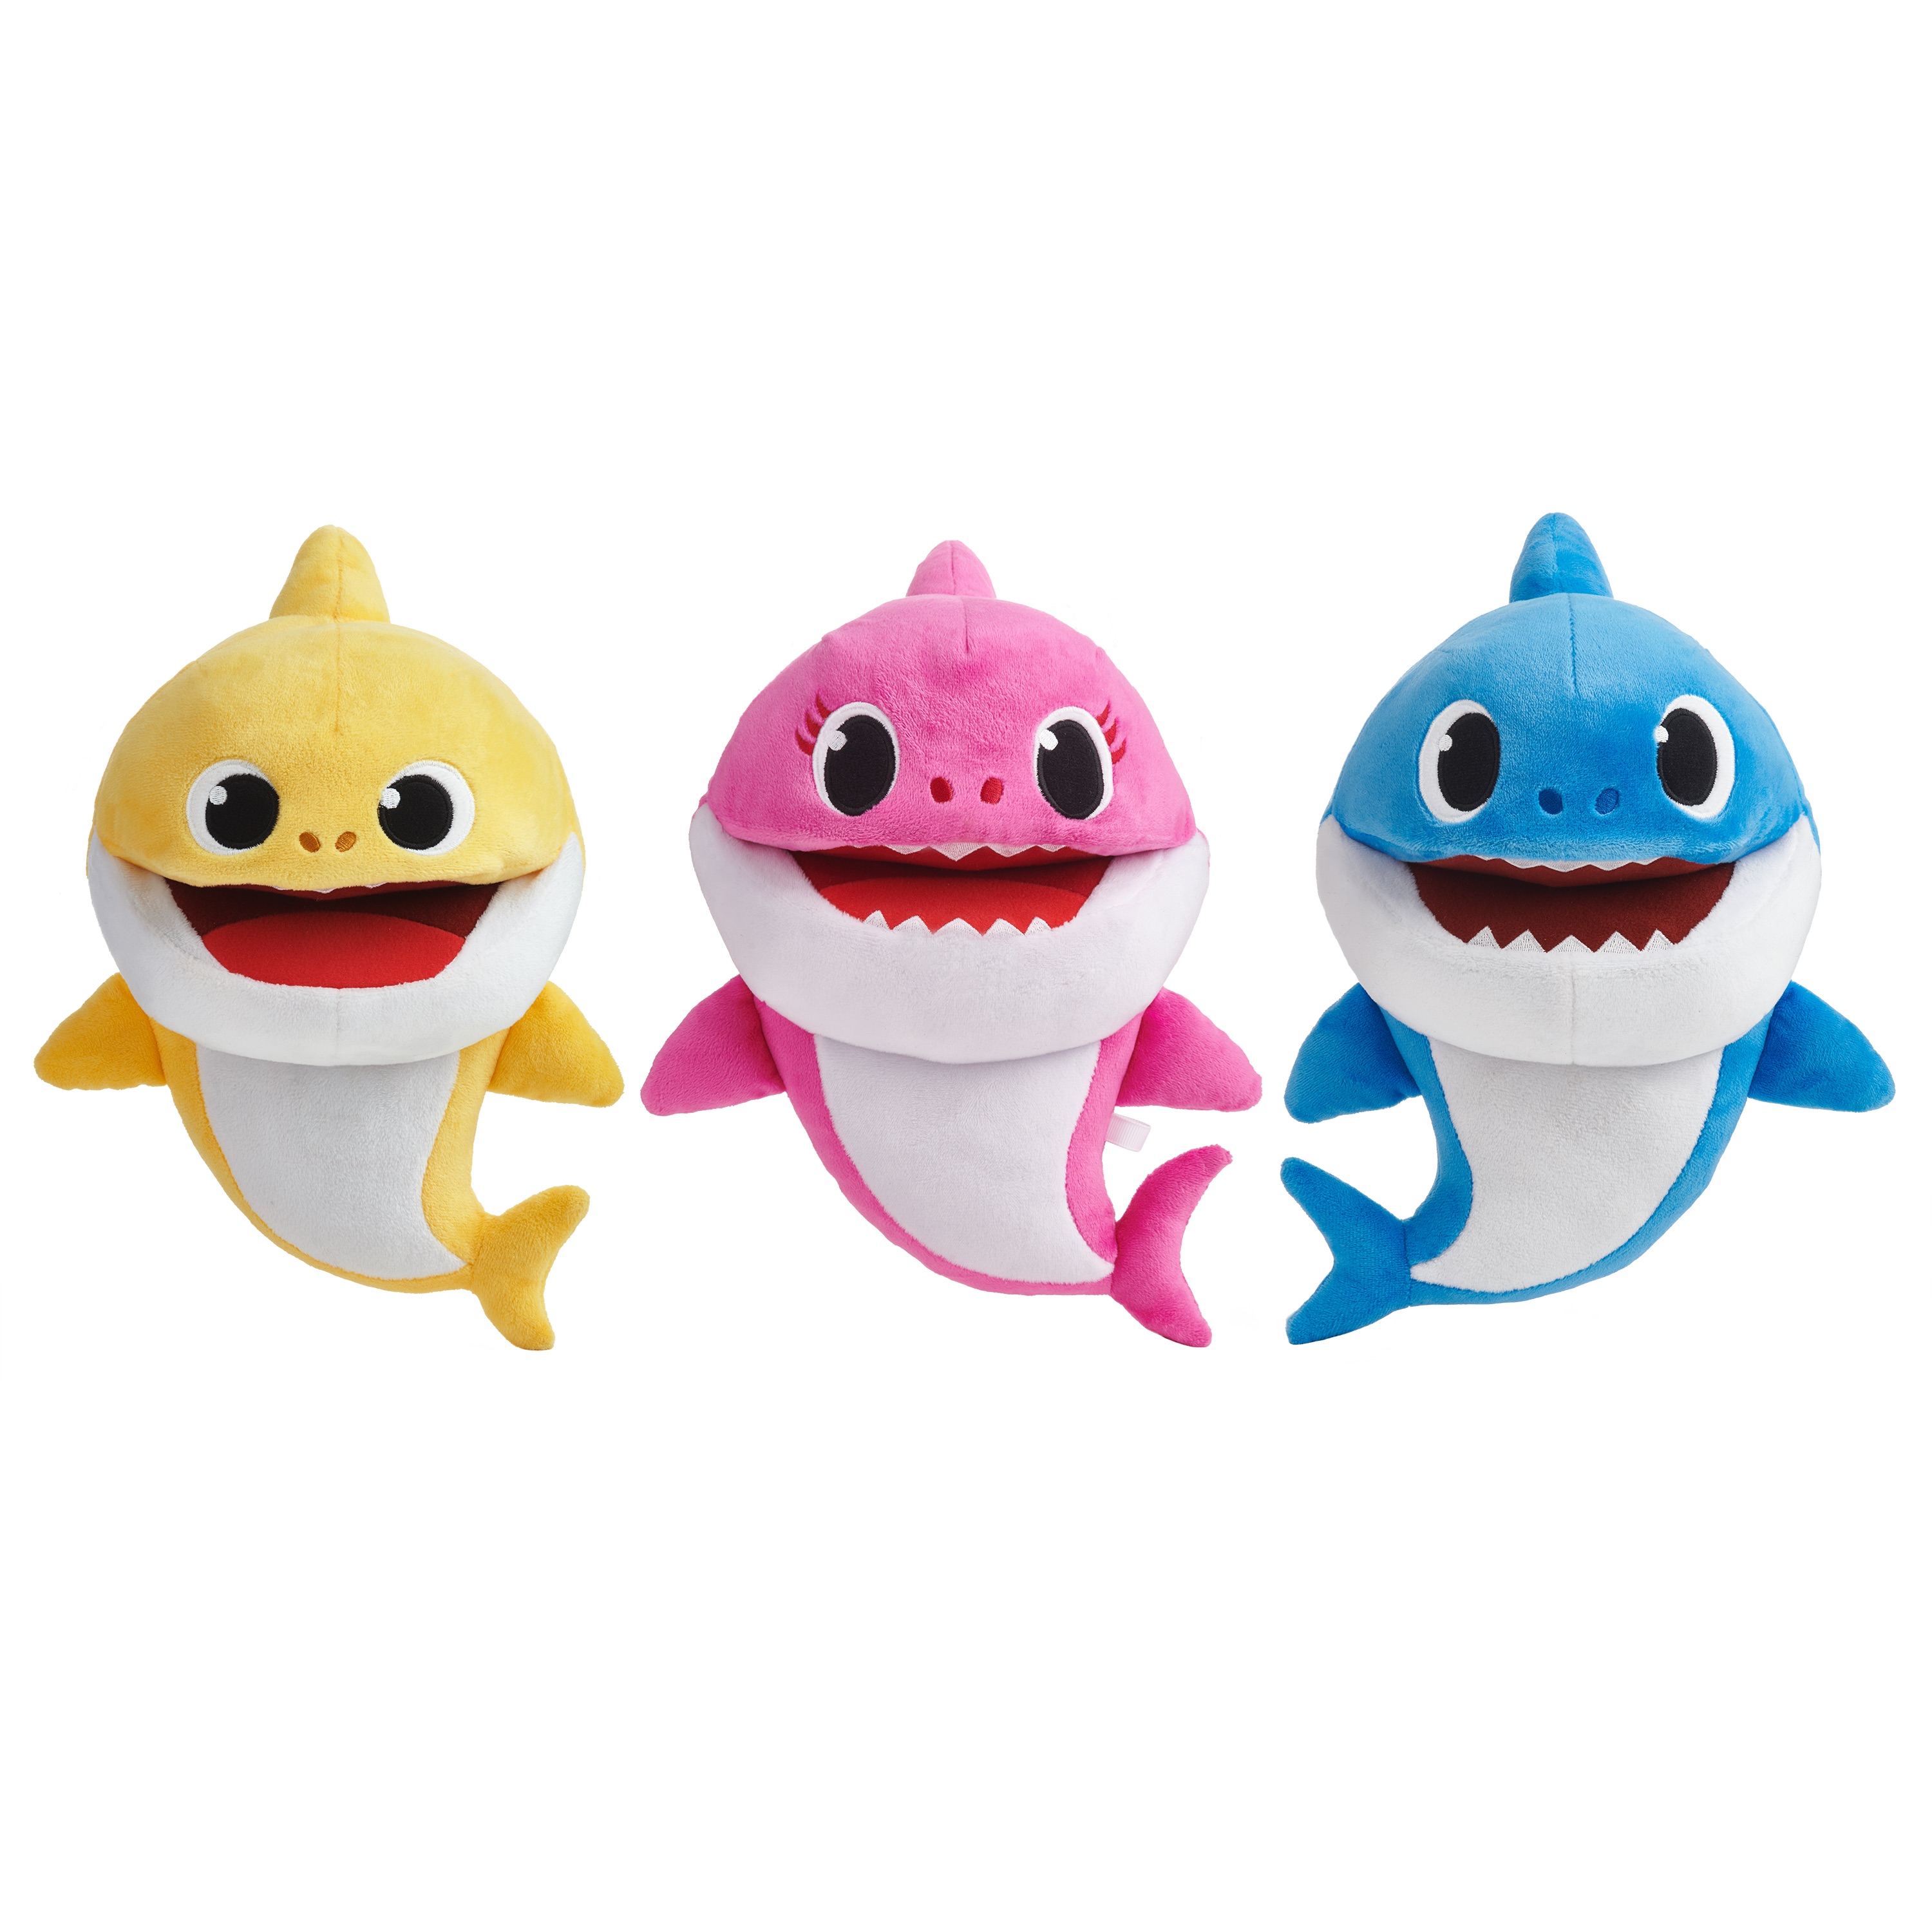 Pinkfong Baby Shark OfficialSong Puppet with Tempo Control - Daddy Shark - Interactive Preschool Plush Toy - By WowWee - image 4 of 8